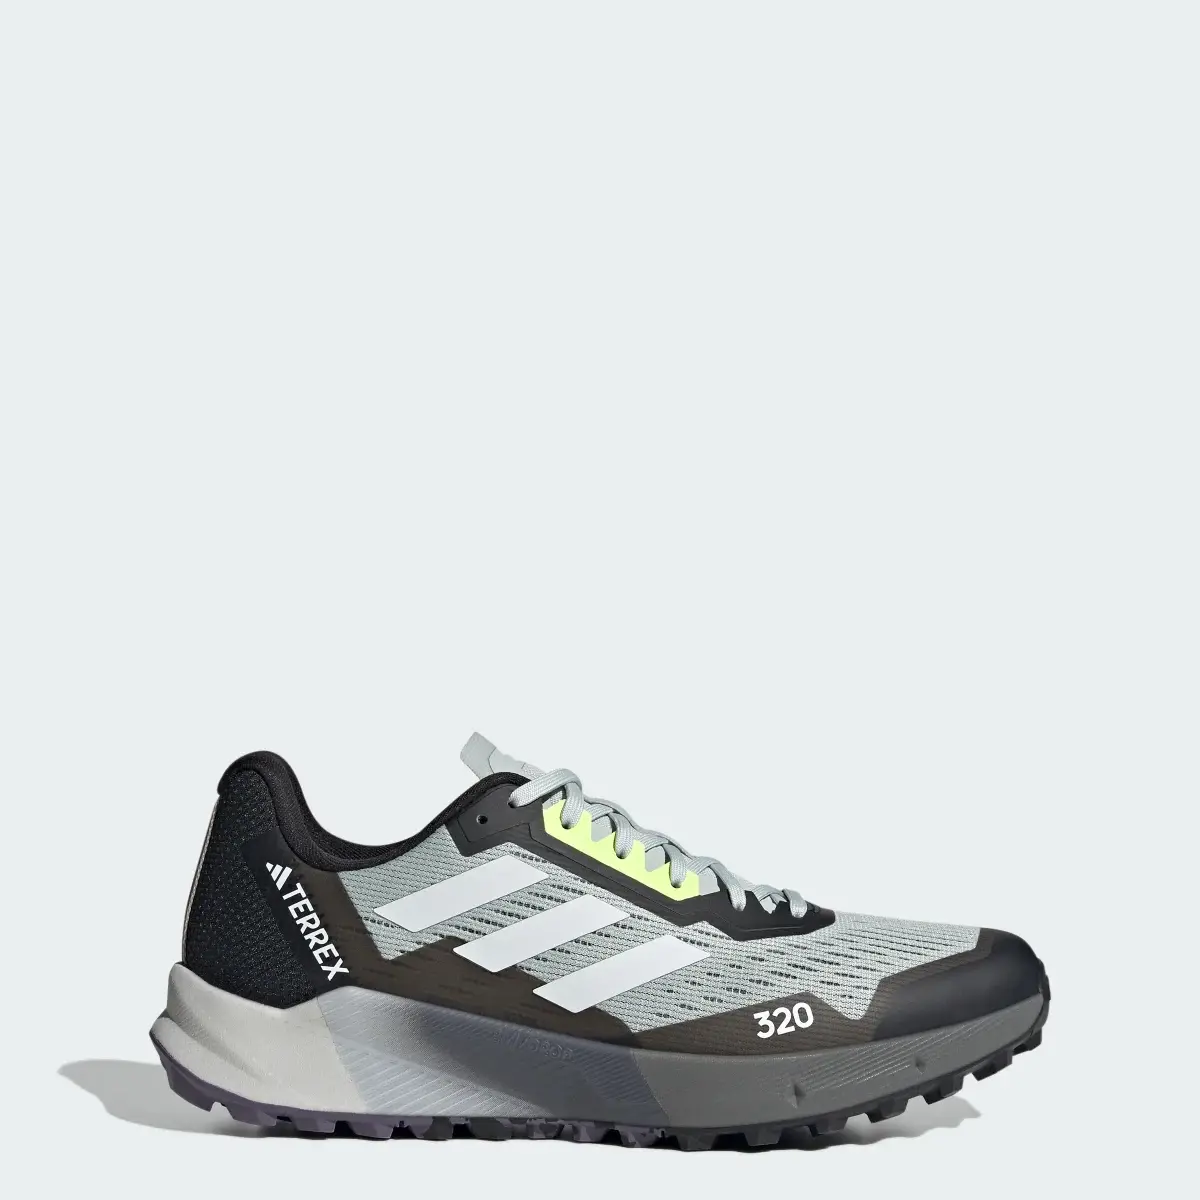 Adidas Terrex Agravic Flow 2.0 Trail Running Shoes. 1